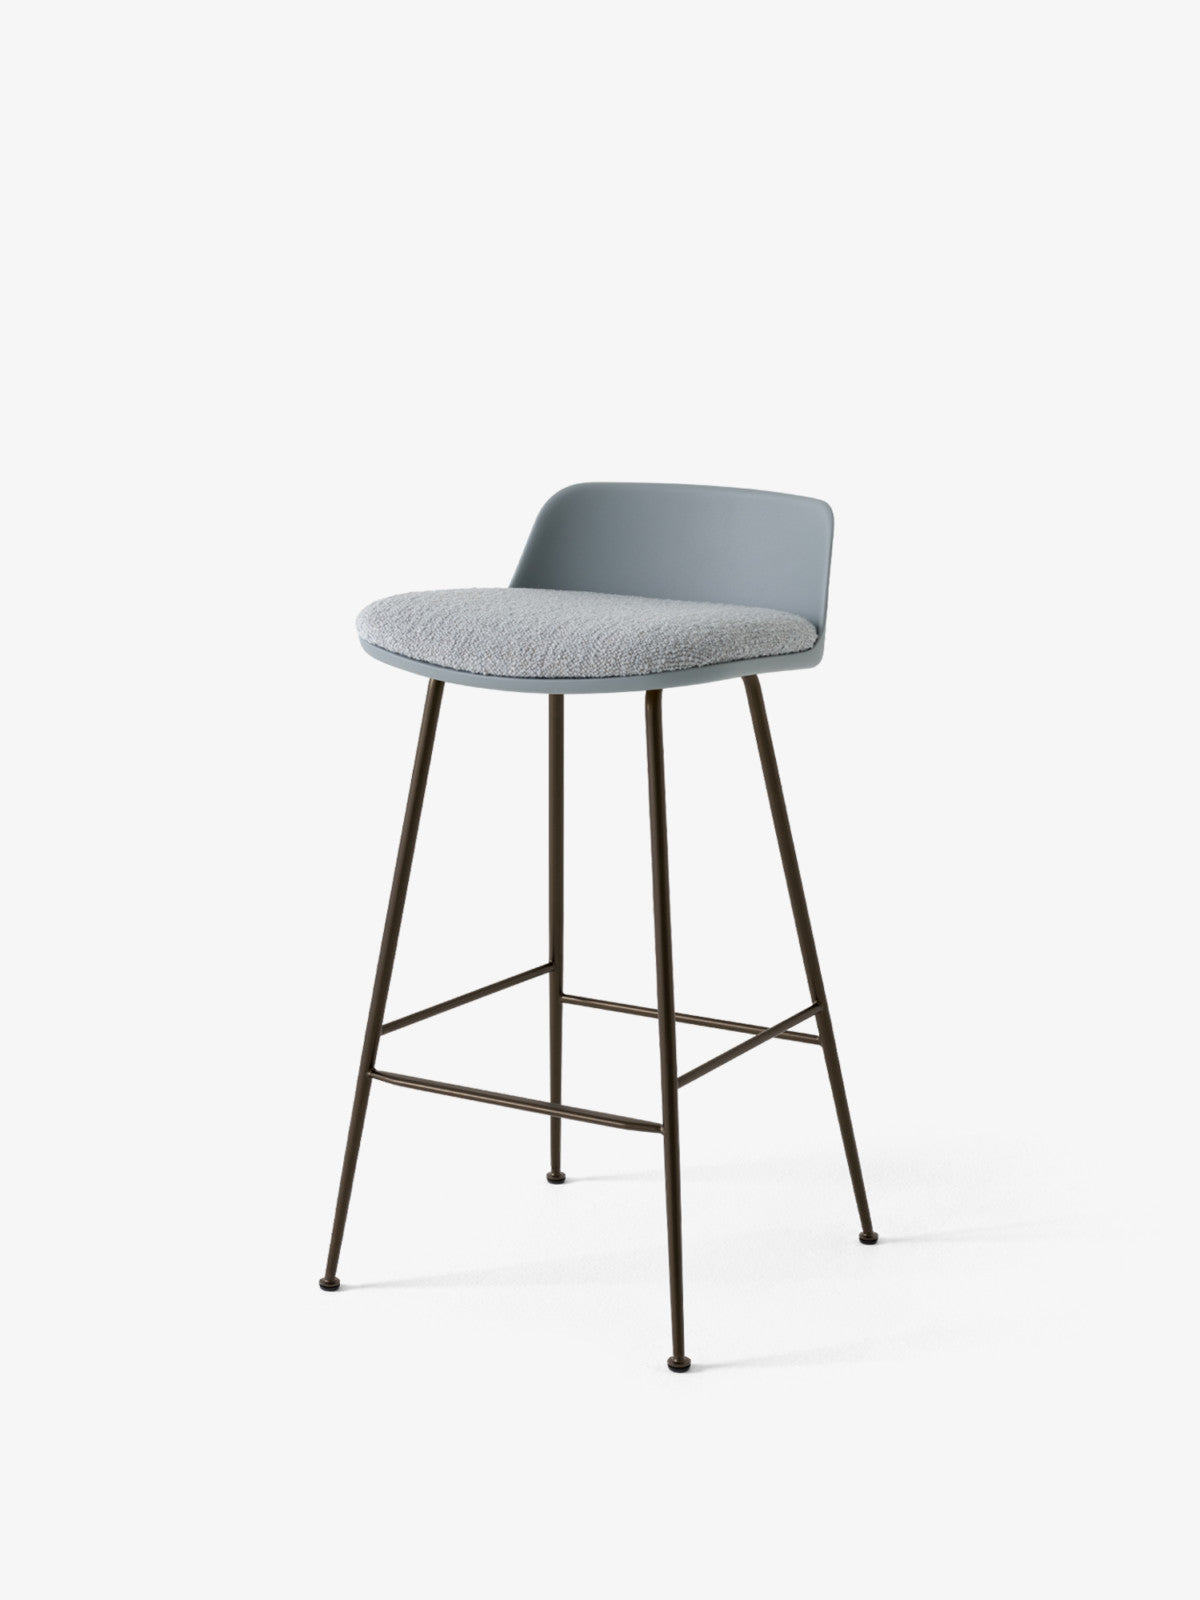 Rely Counter Stool HW82 Seat Upholstery